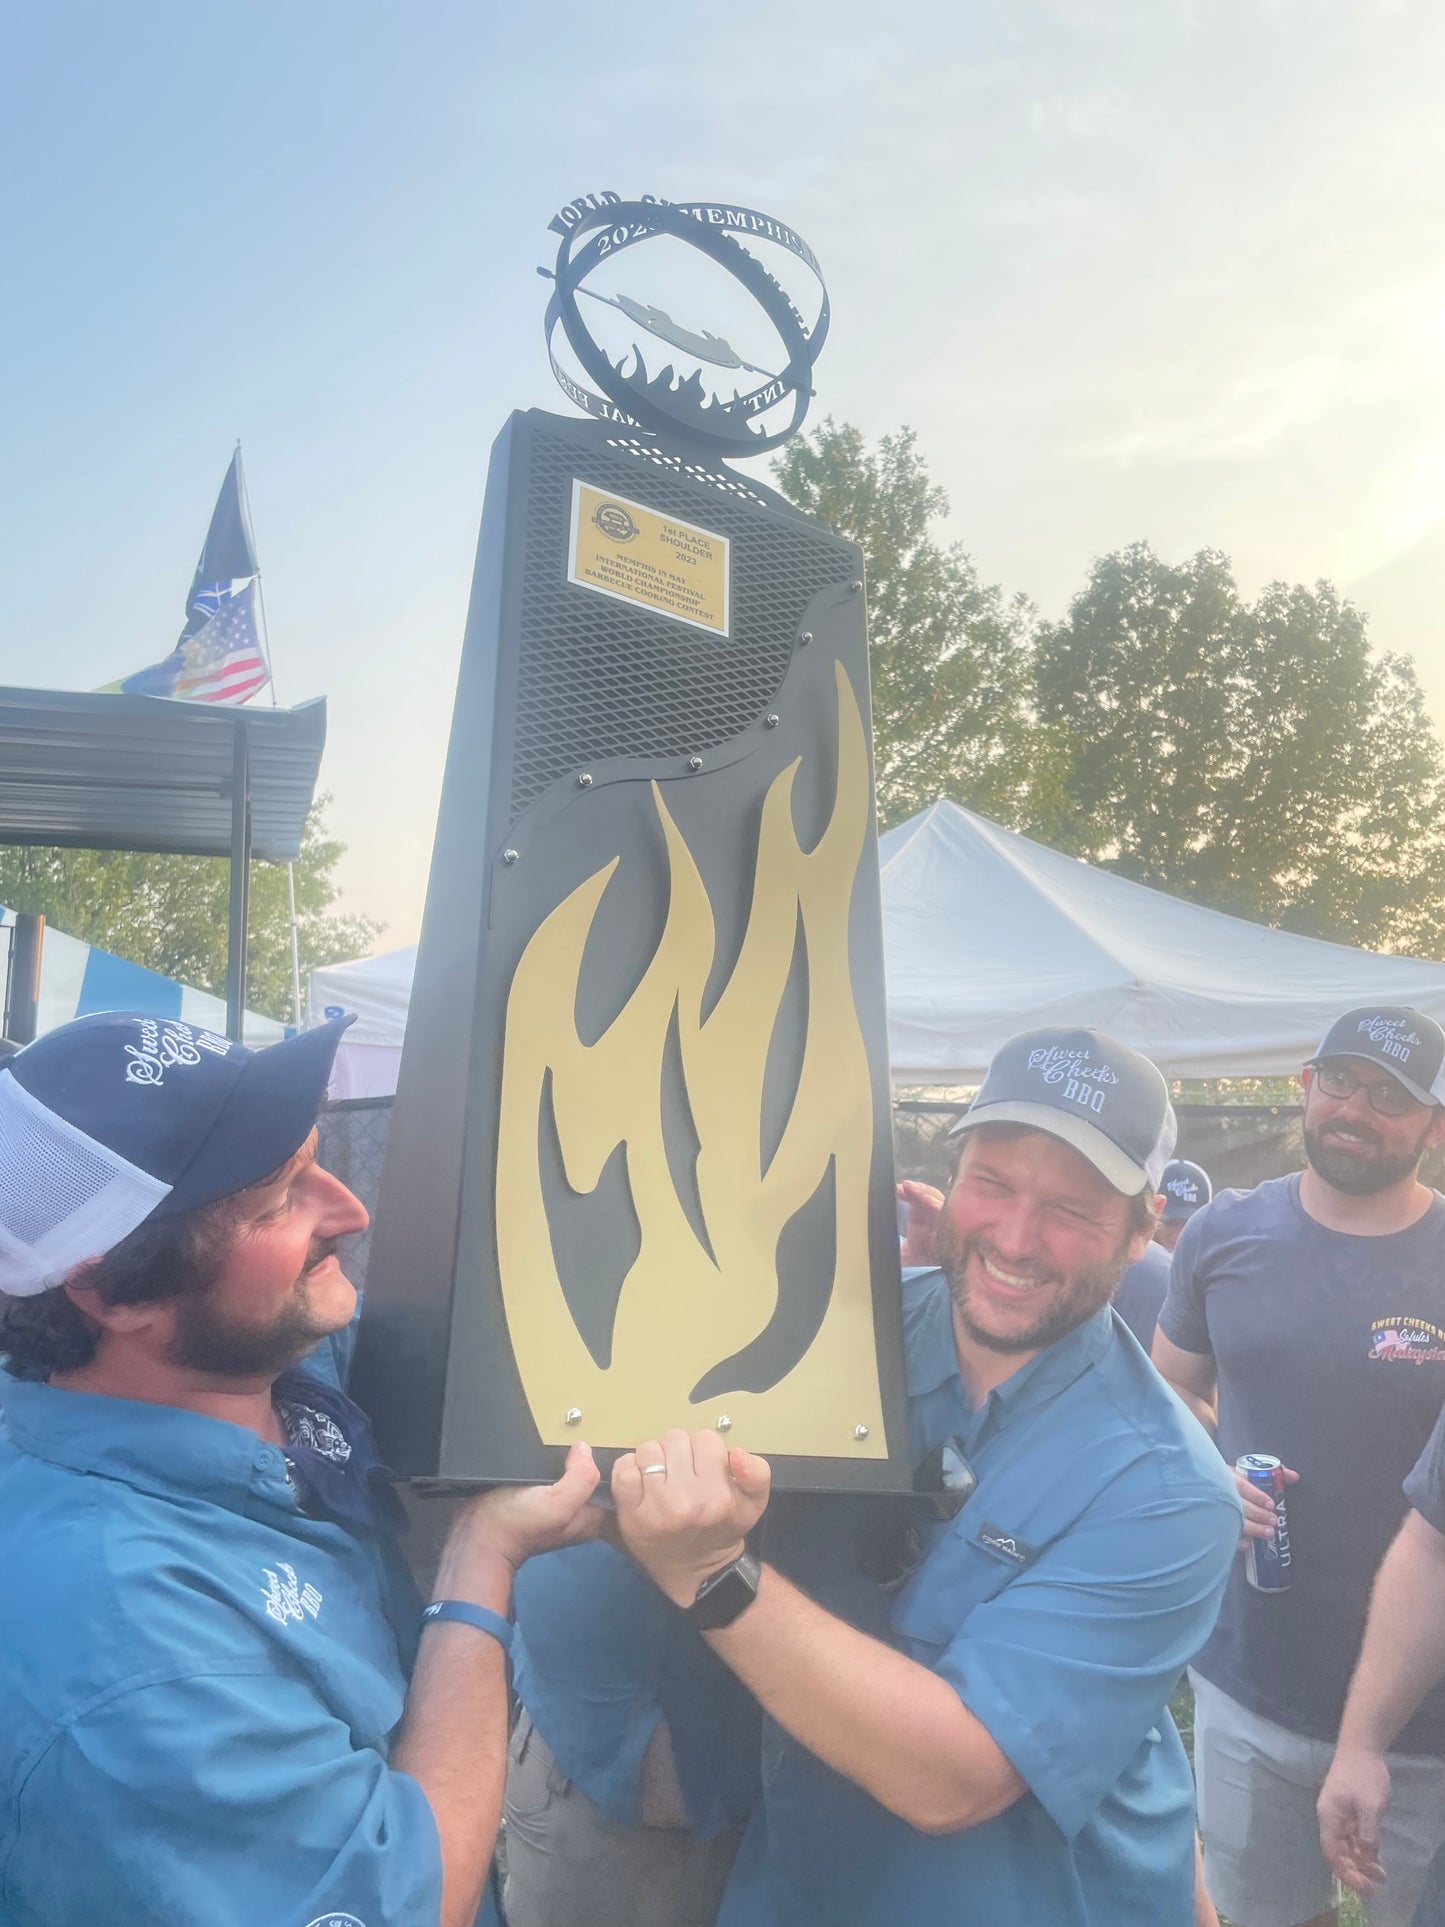 HPP TAKES FIRST PLACE IN SHOULDER AT THE WORLD CHAMPIONSHIP BBQ COOKING CONTEST